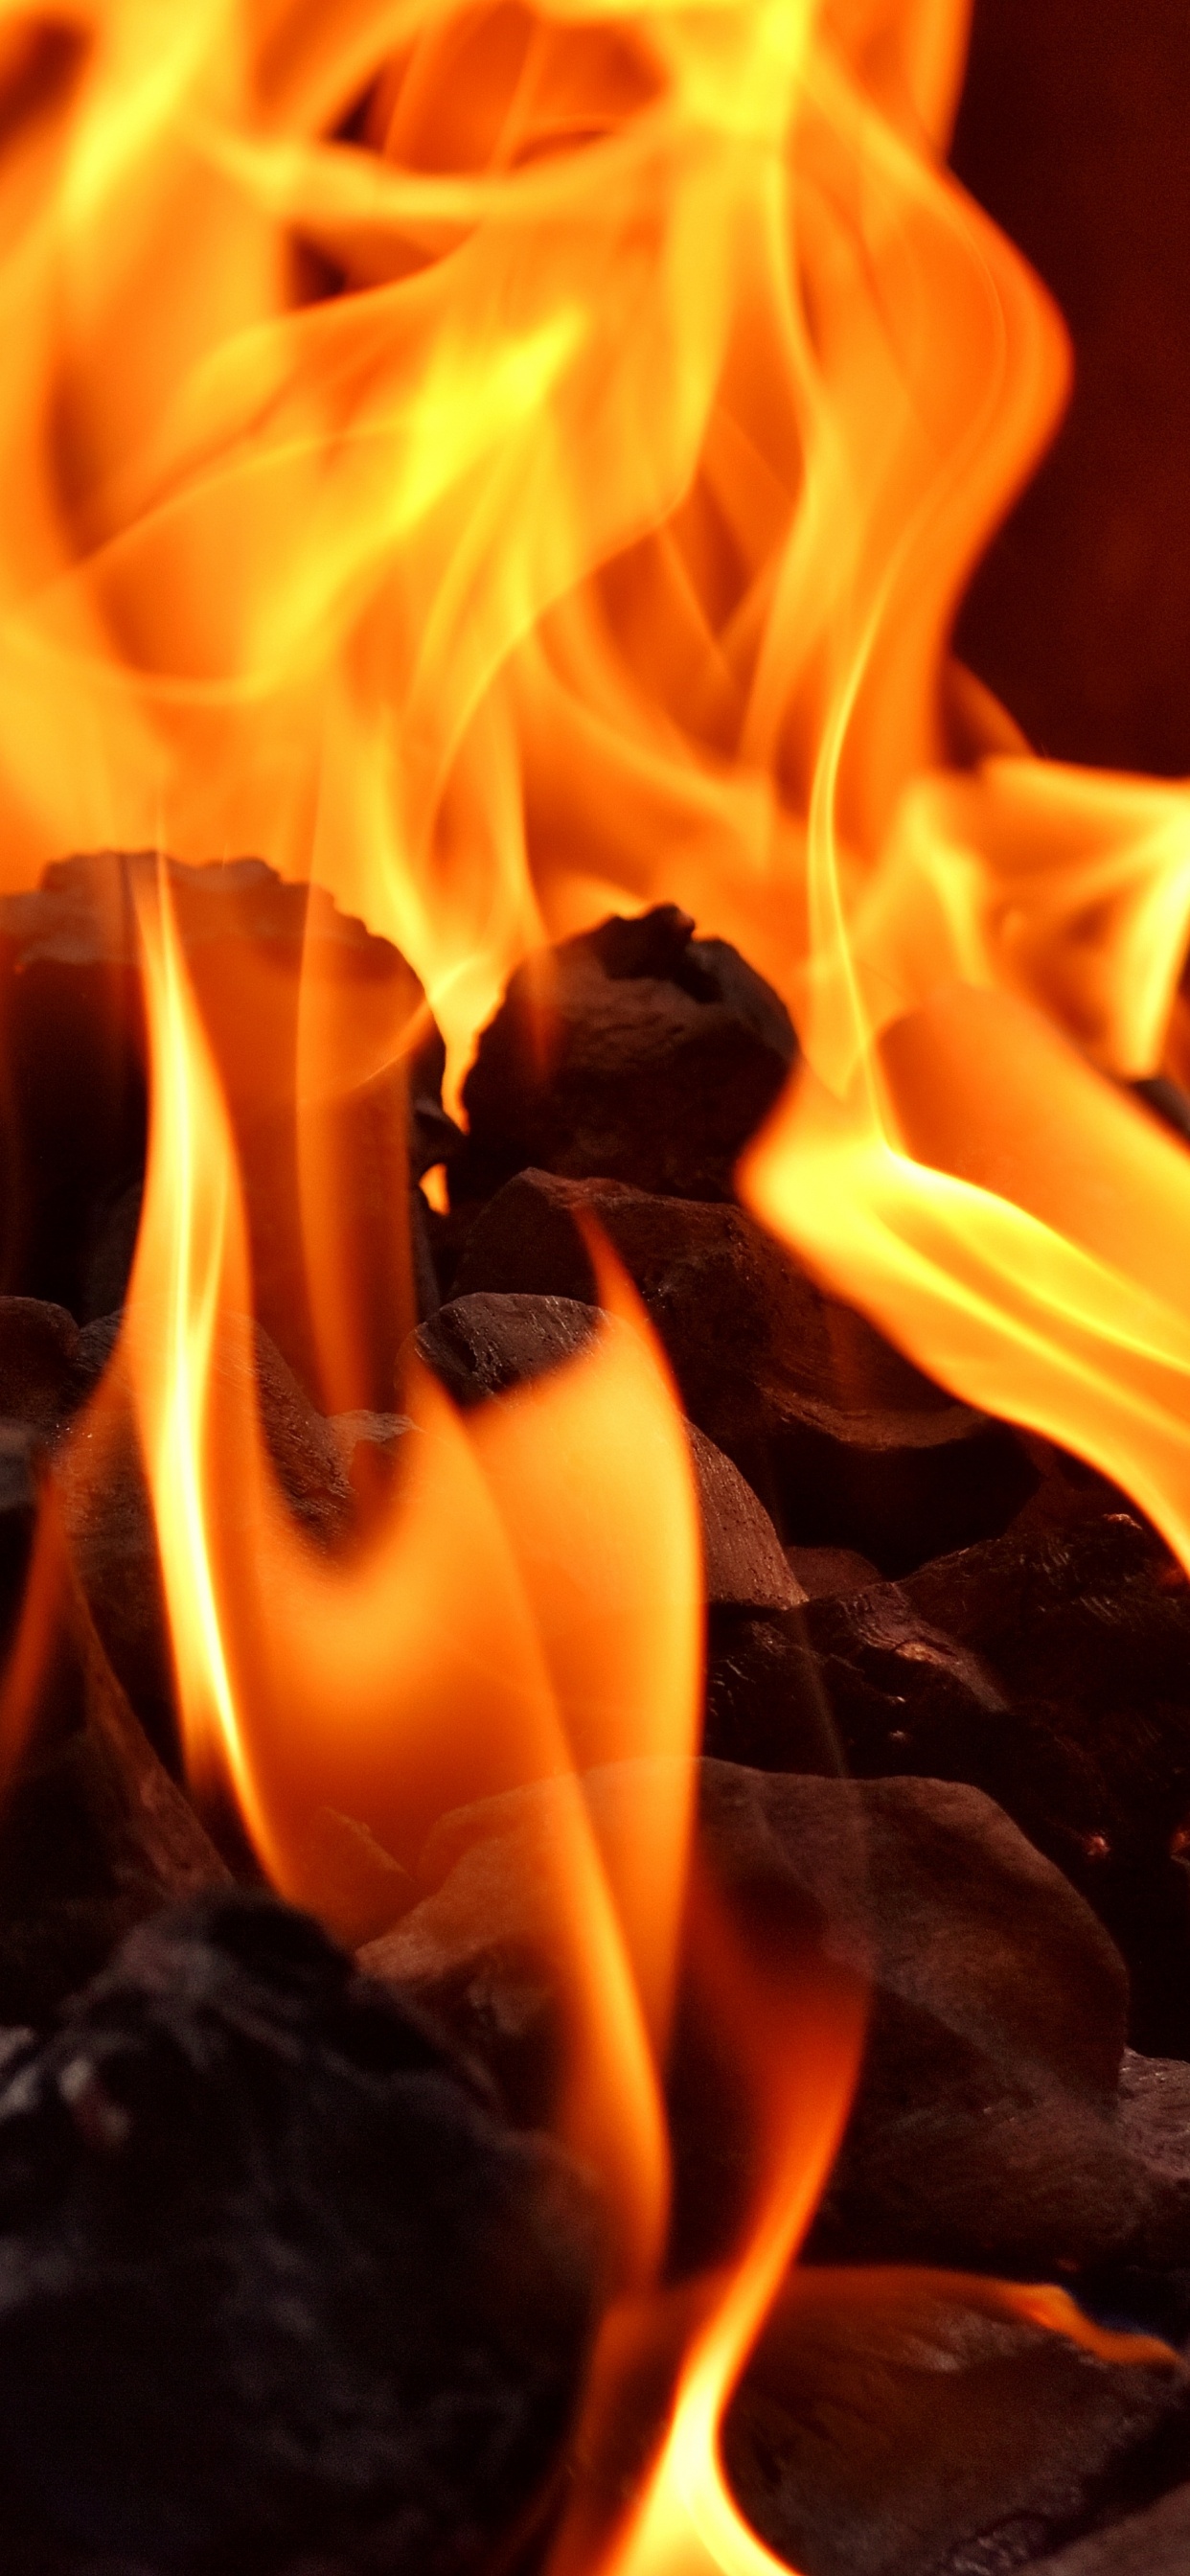 Burning Fire on Black Textile. Wallpaper in 1242x2688 Resolution